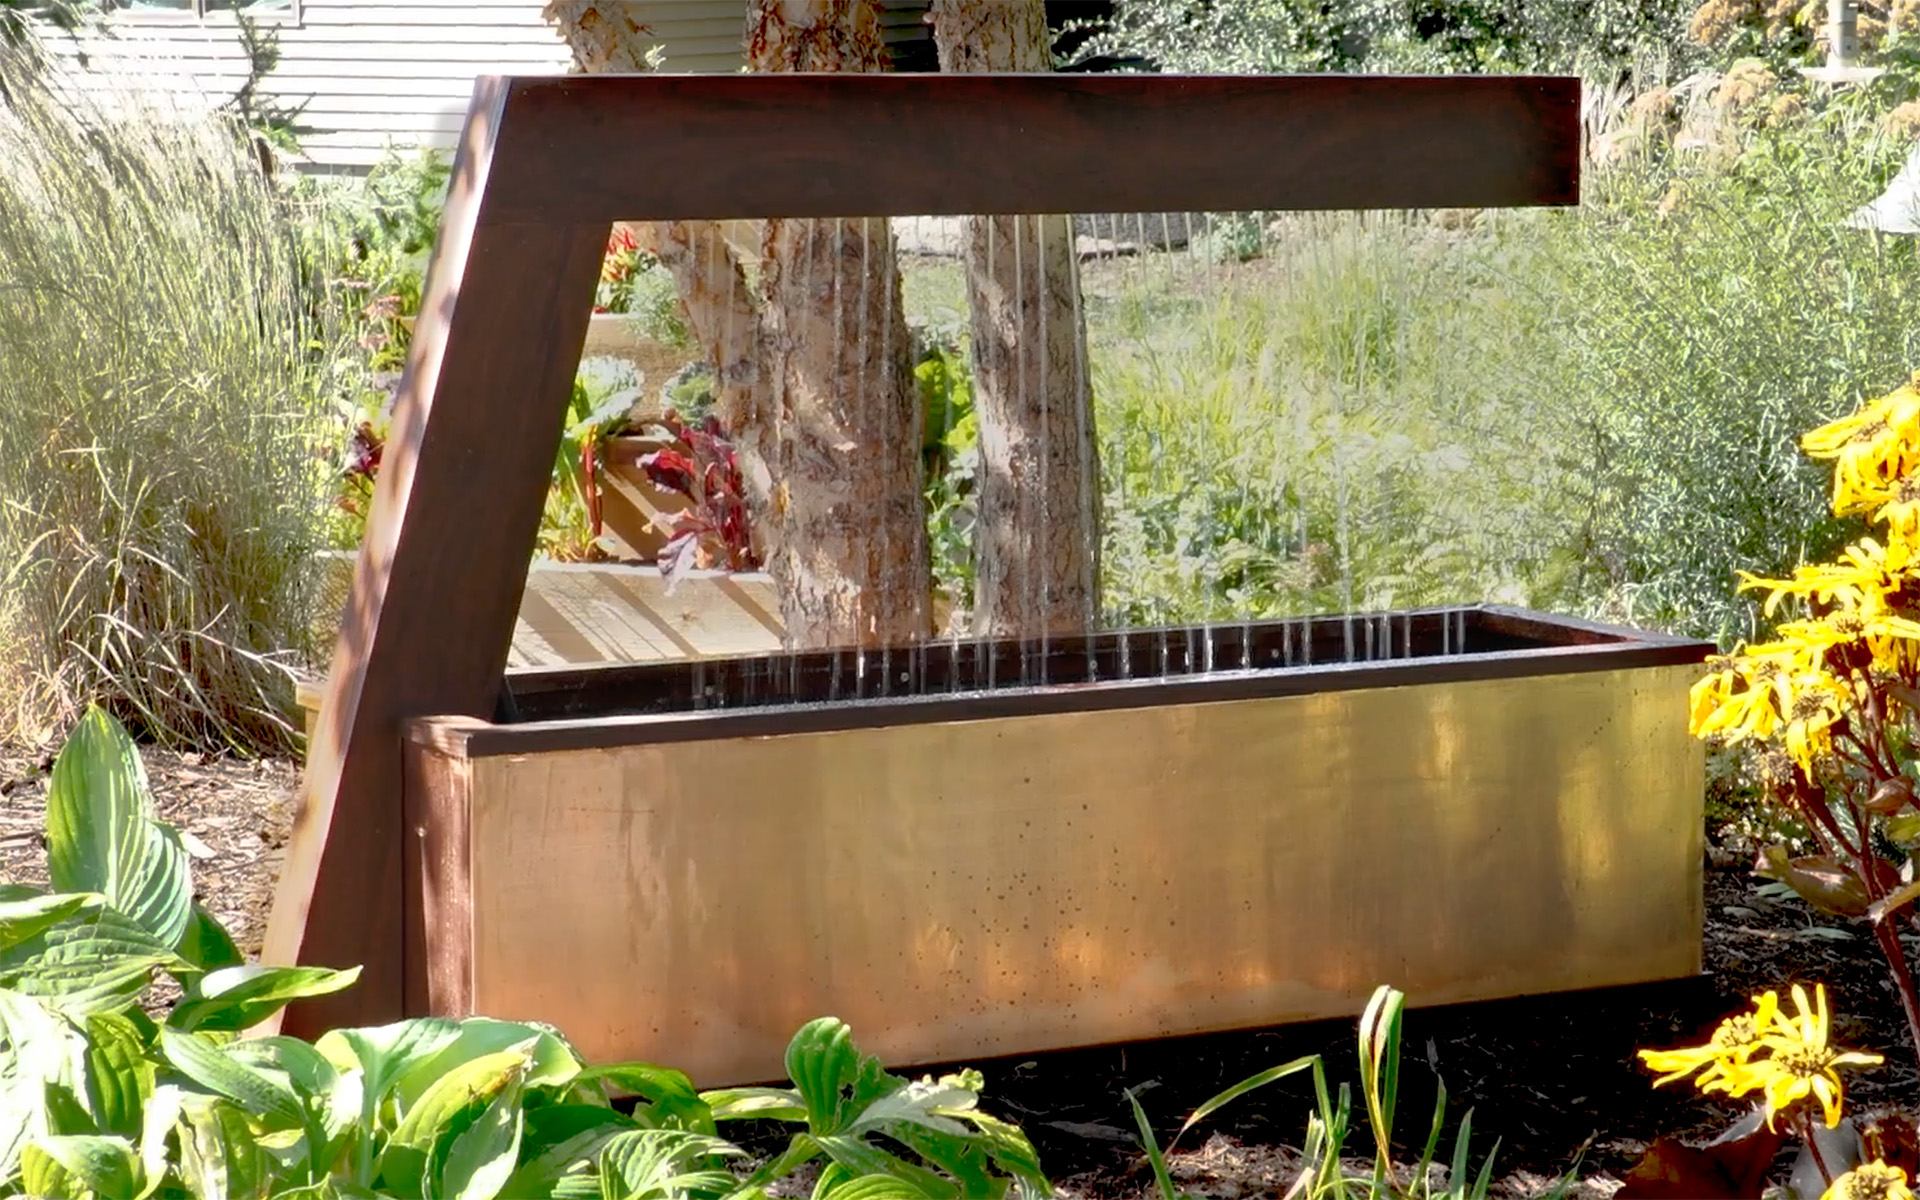 DIY Solar Water Fountain to Enjoy Anywhere Around Your Home